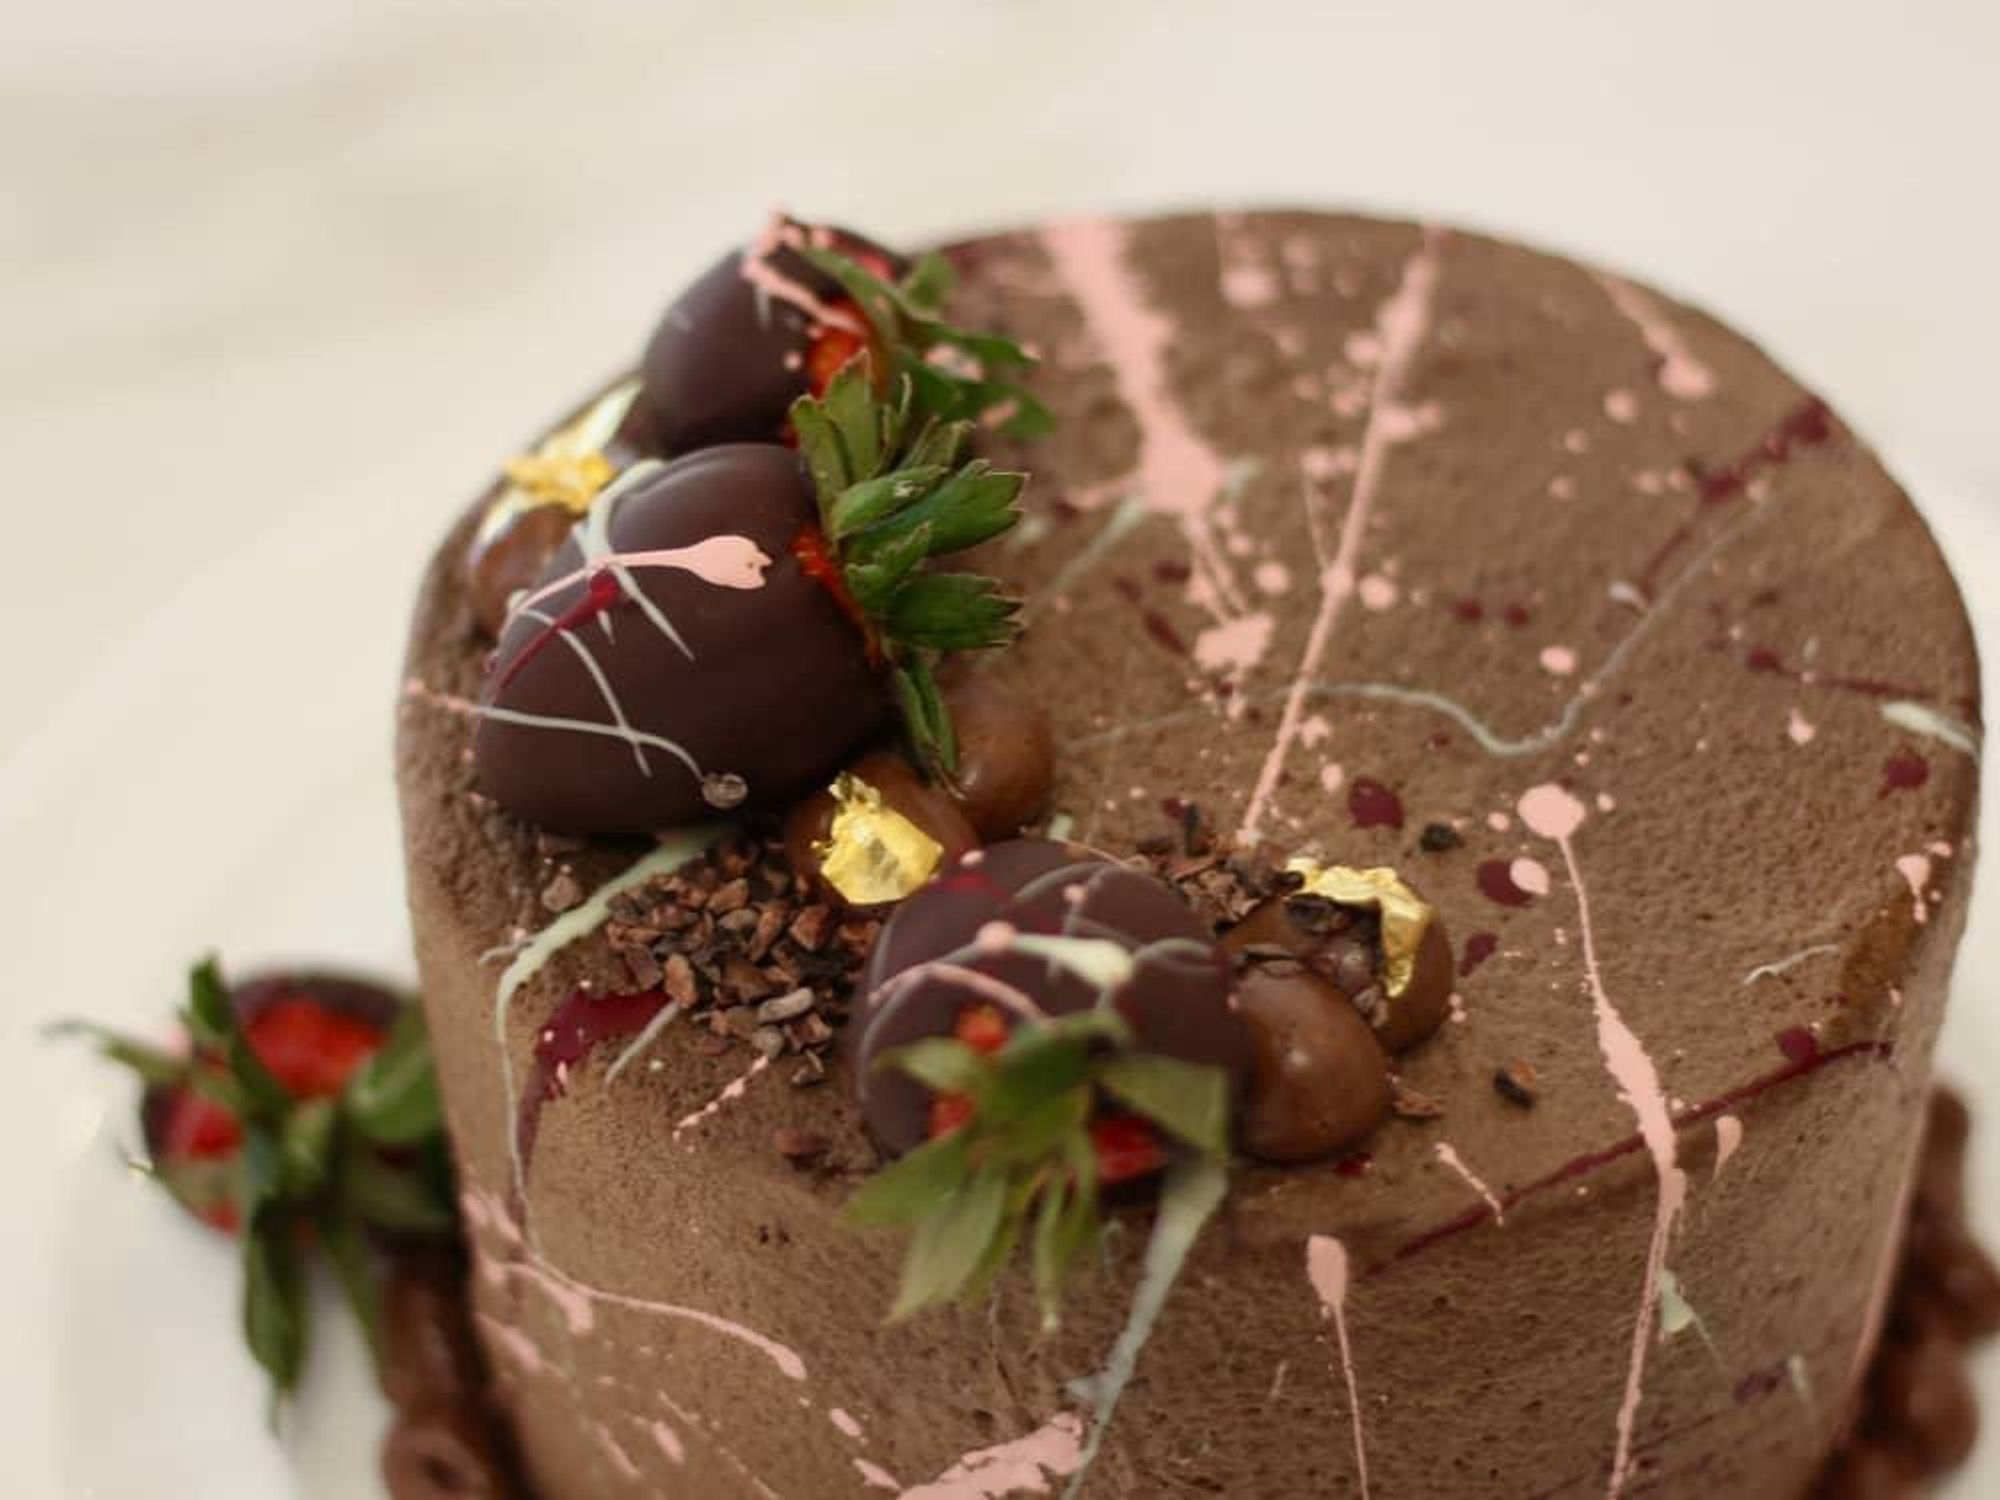 The Joule presents Valentine’s Pop-Up Bakery